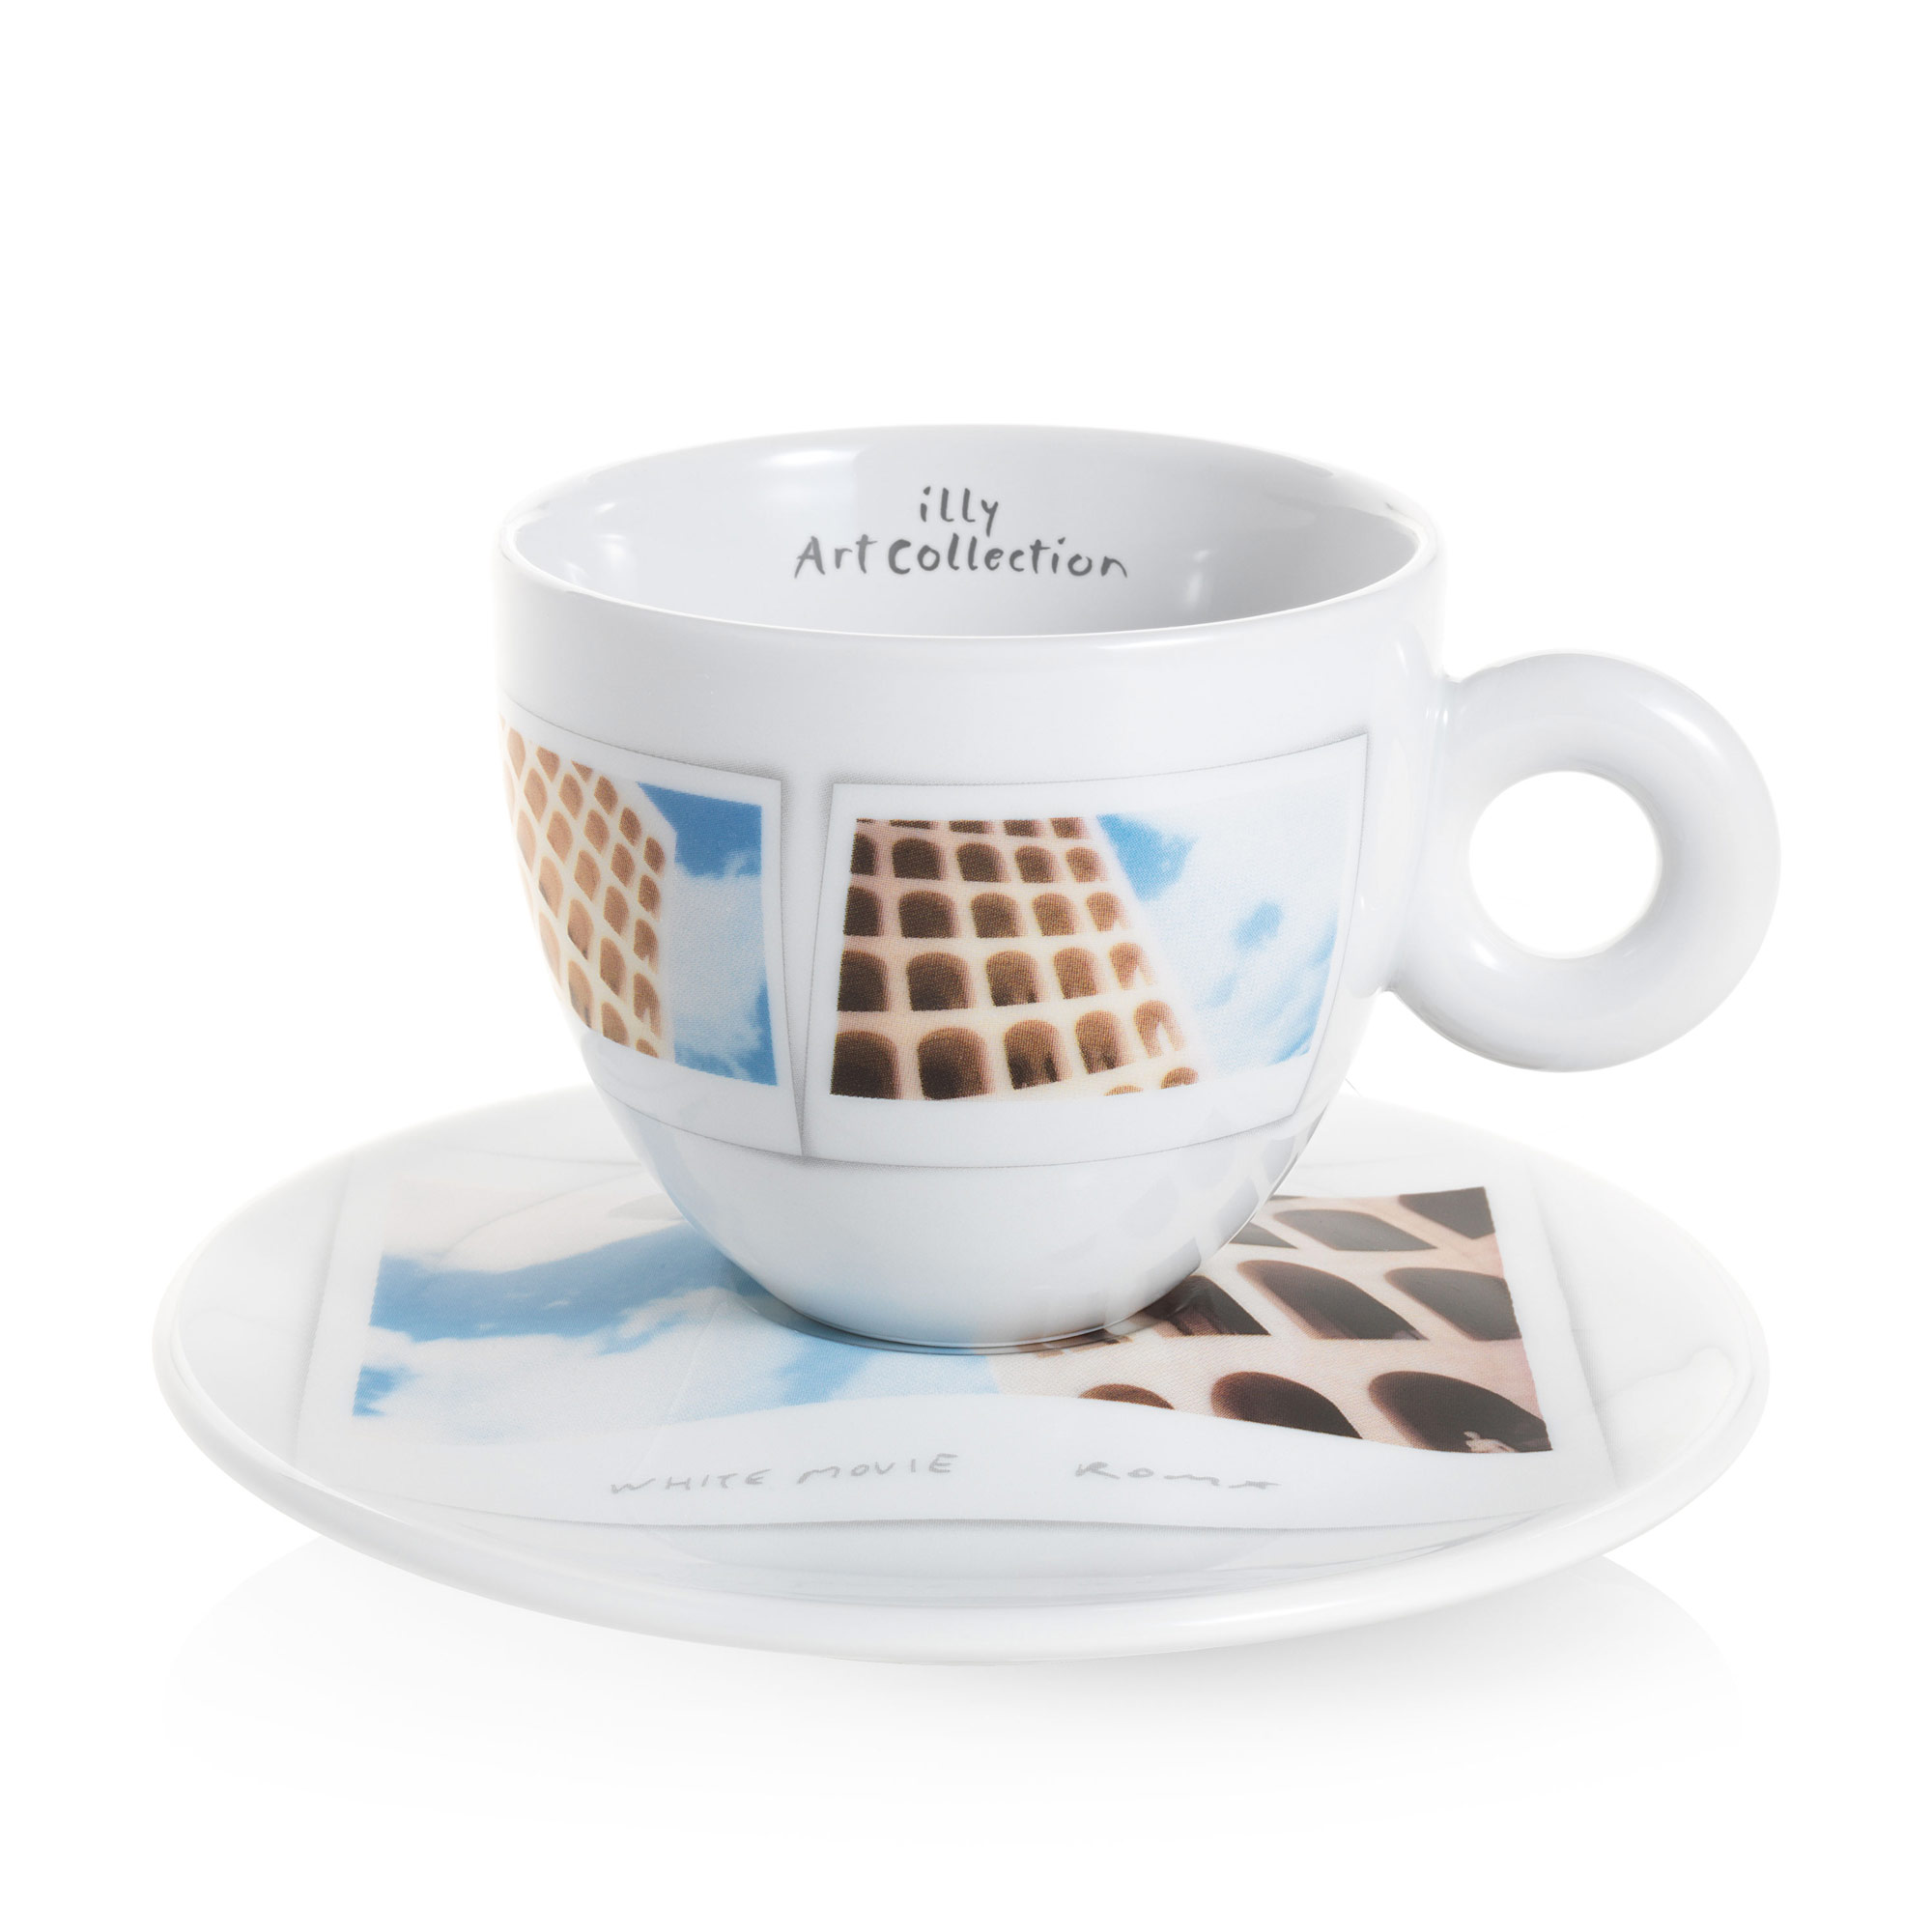 Maurizio Galimberti Collection illy Cappuccino Cup